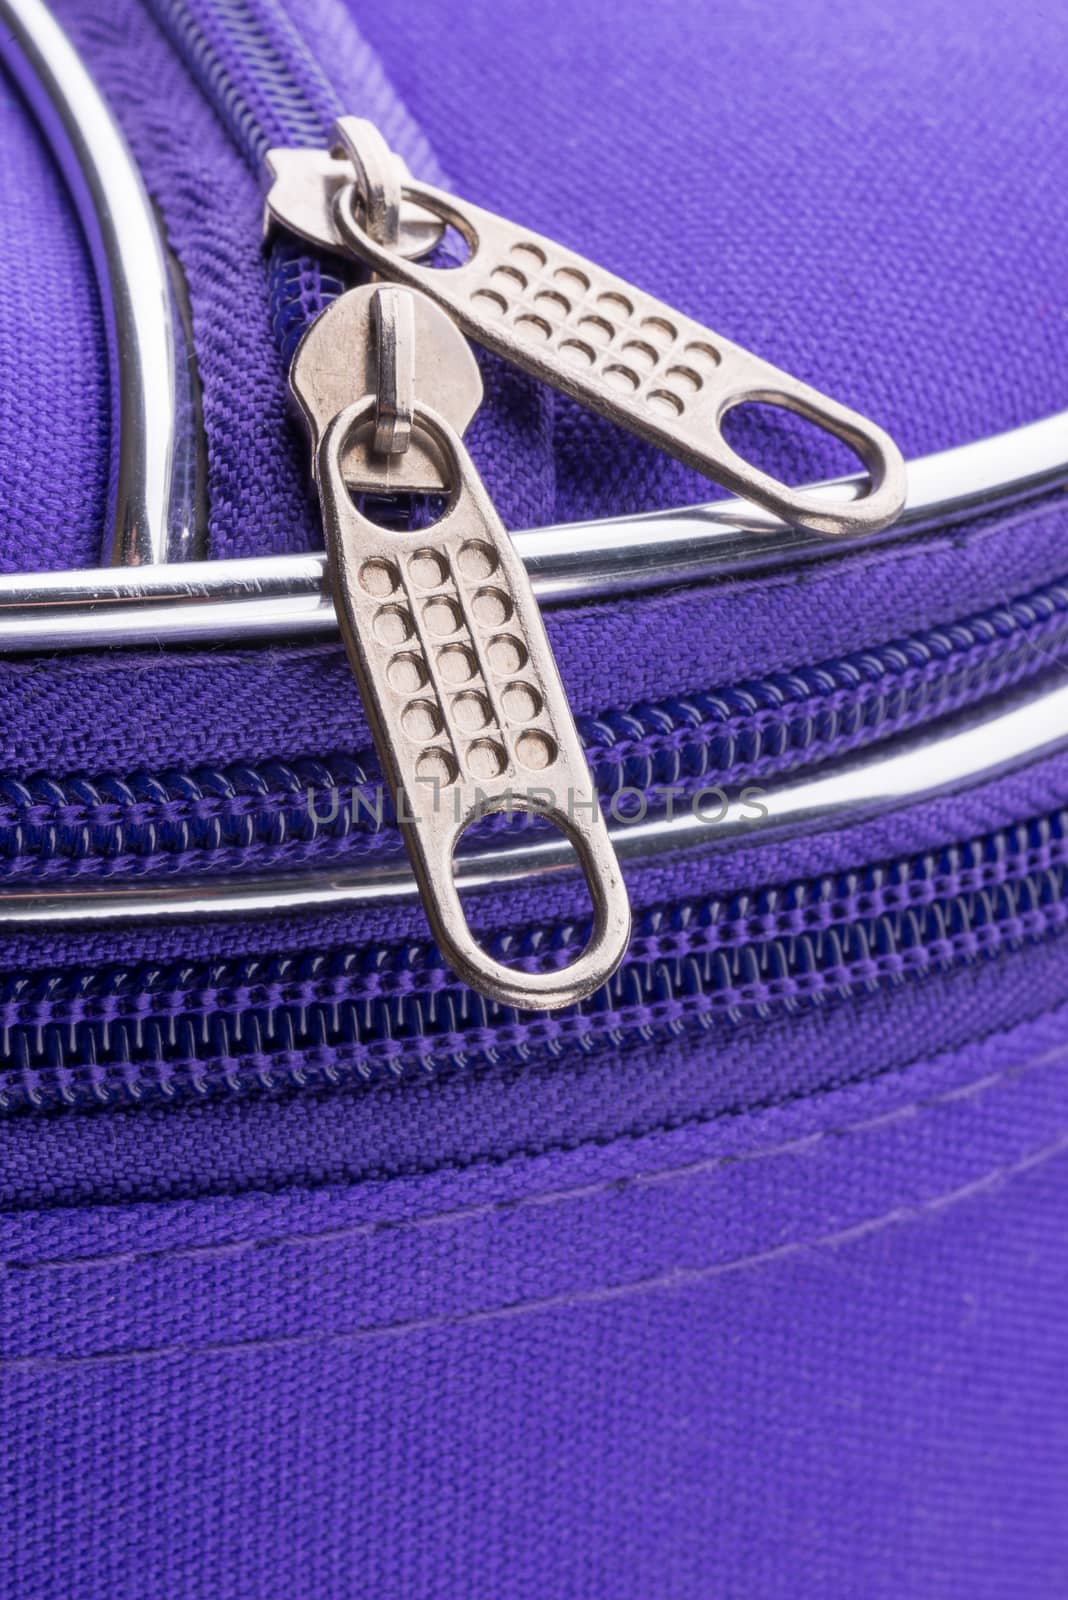 Pull Tab and Chain of a Zipper on a Violet Suitcase by MaxalTamor